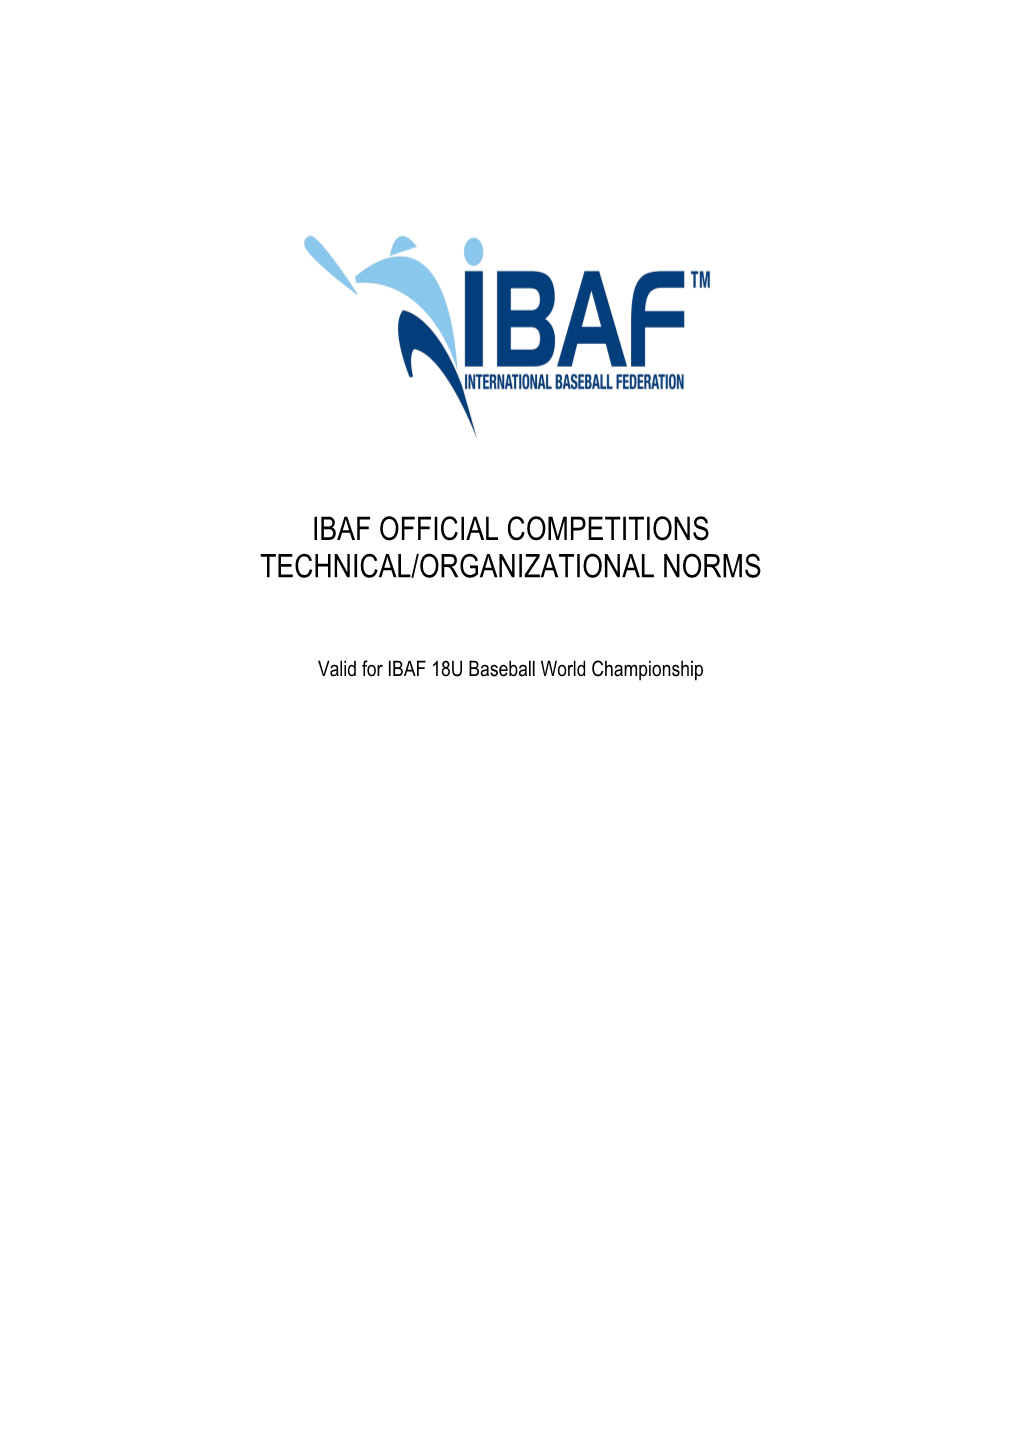 Ibaf Official Competitions Technical/Organizational Norms